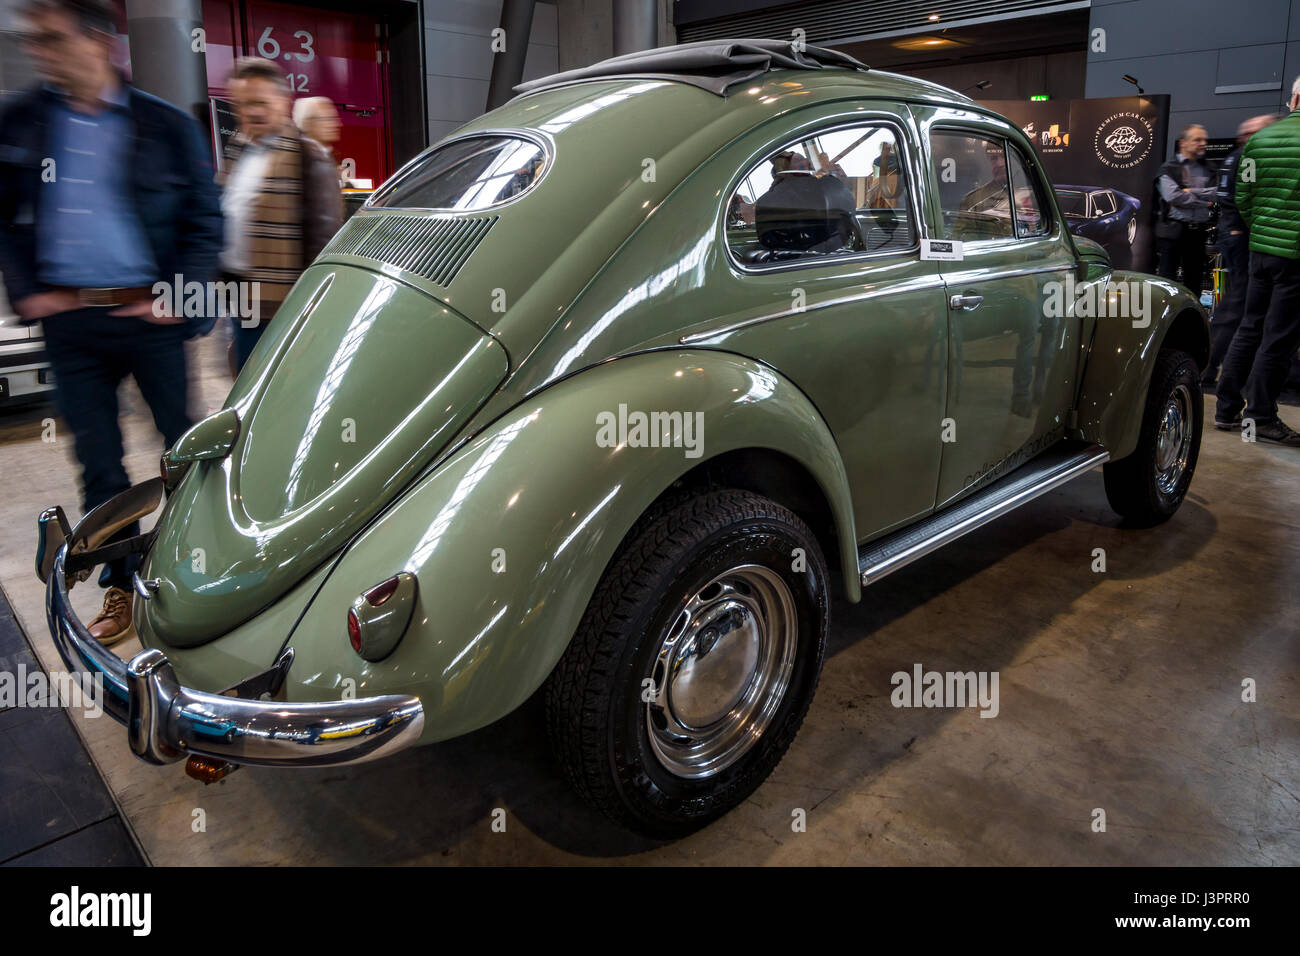 STUTTGART, GERMANY - MARCH 03, 2017: Subcompact Volkswagen Beetle, 1973. Rear view. Europe's greatest classic car exhibition 'RETRO CLASSICS' Stock Photo